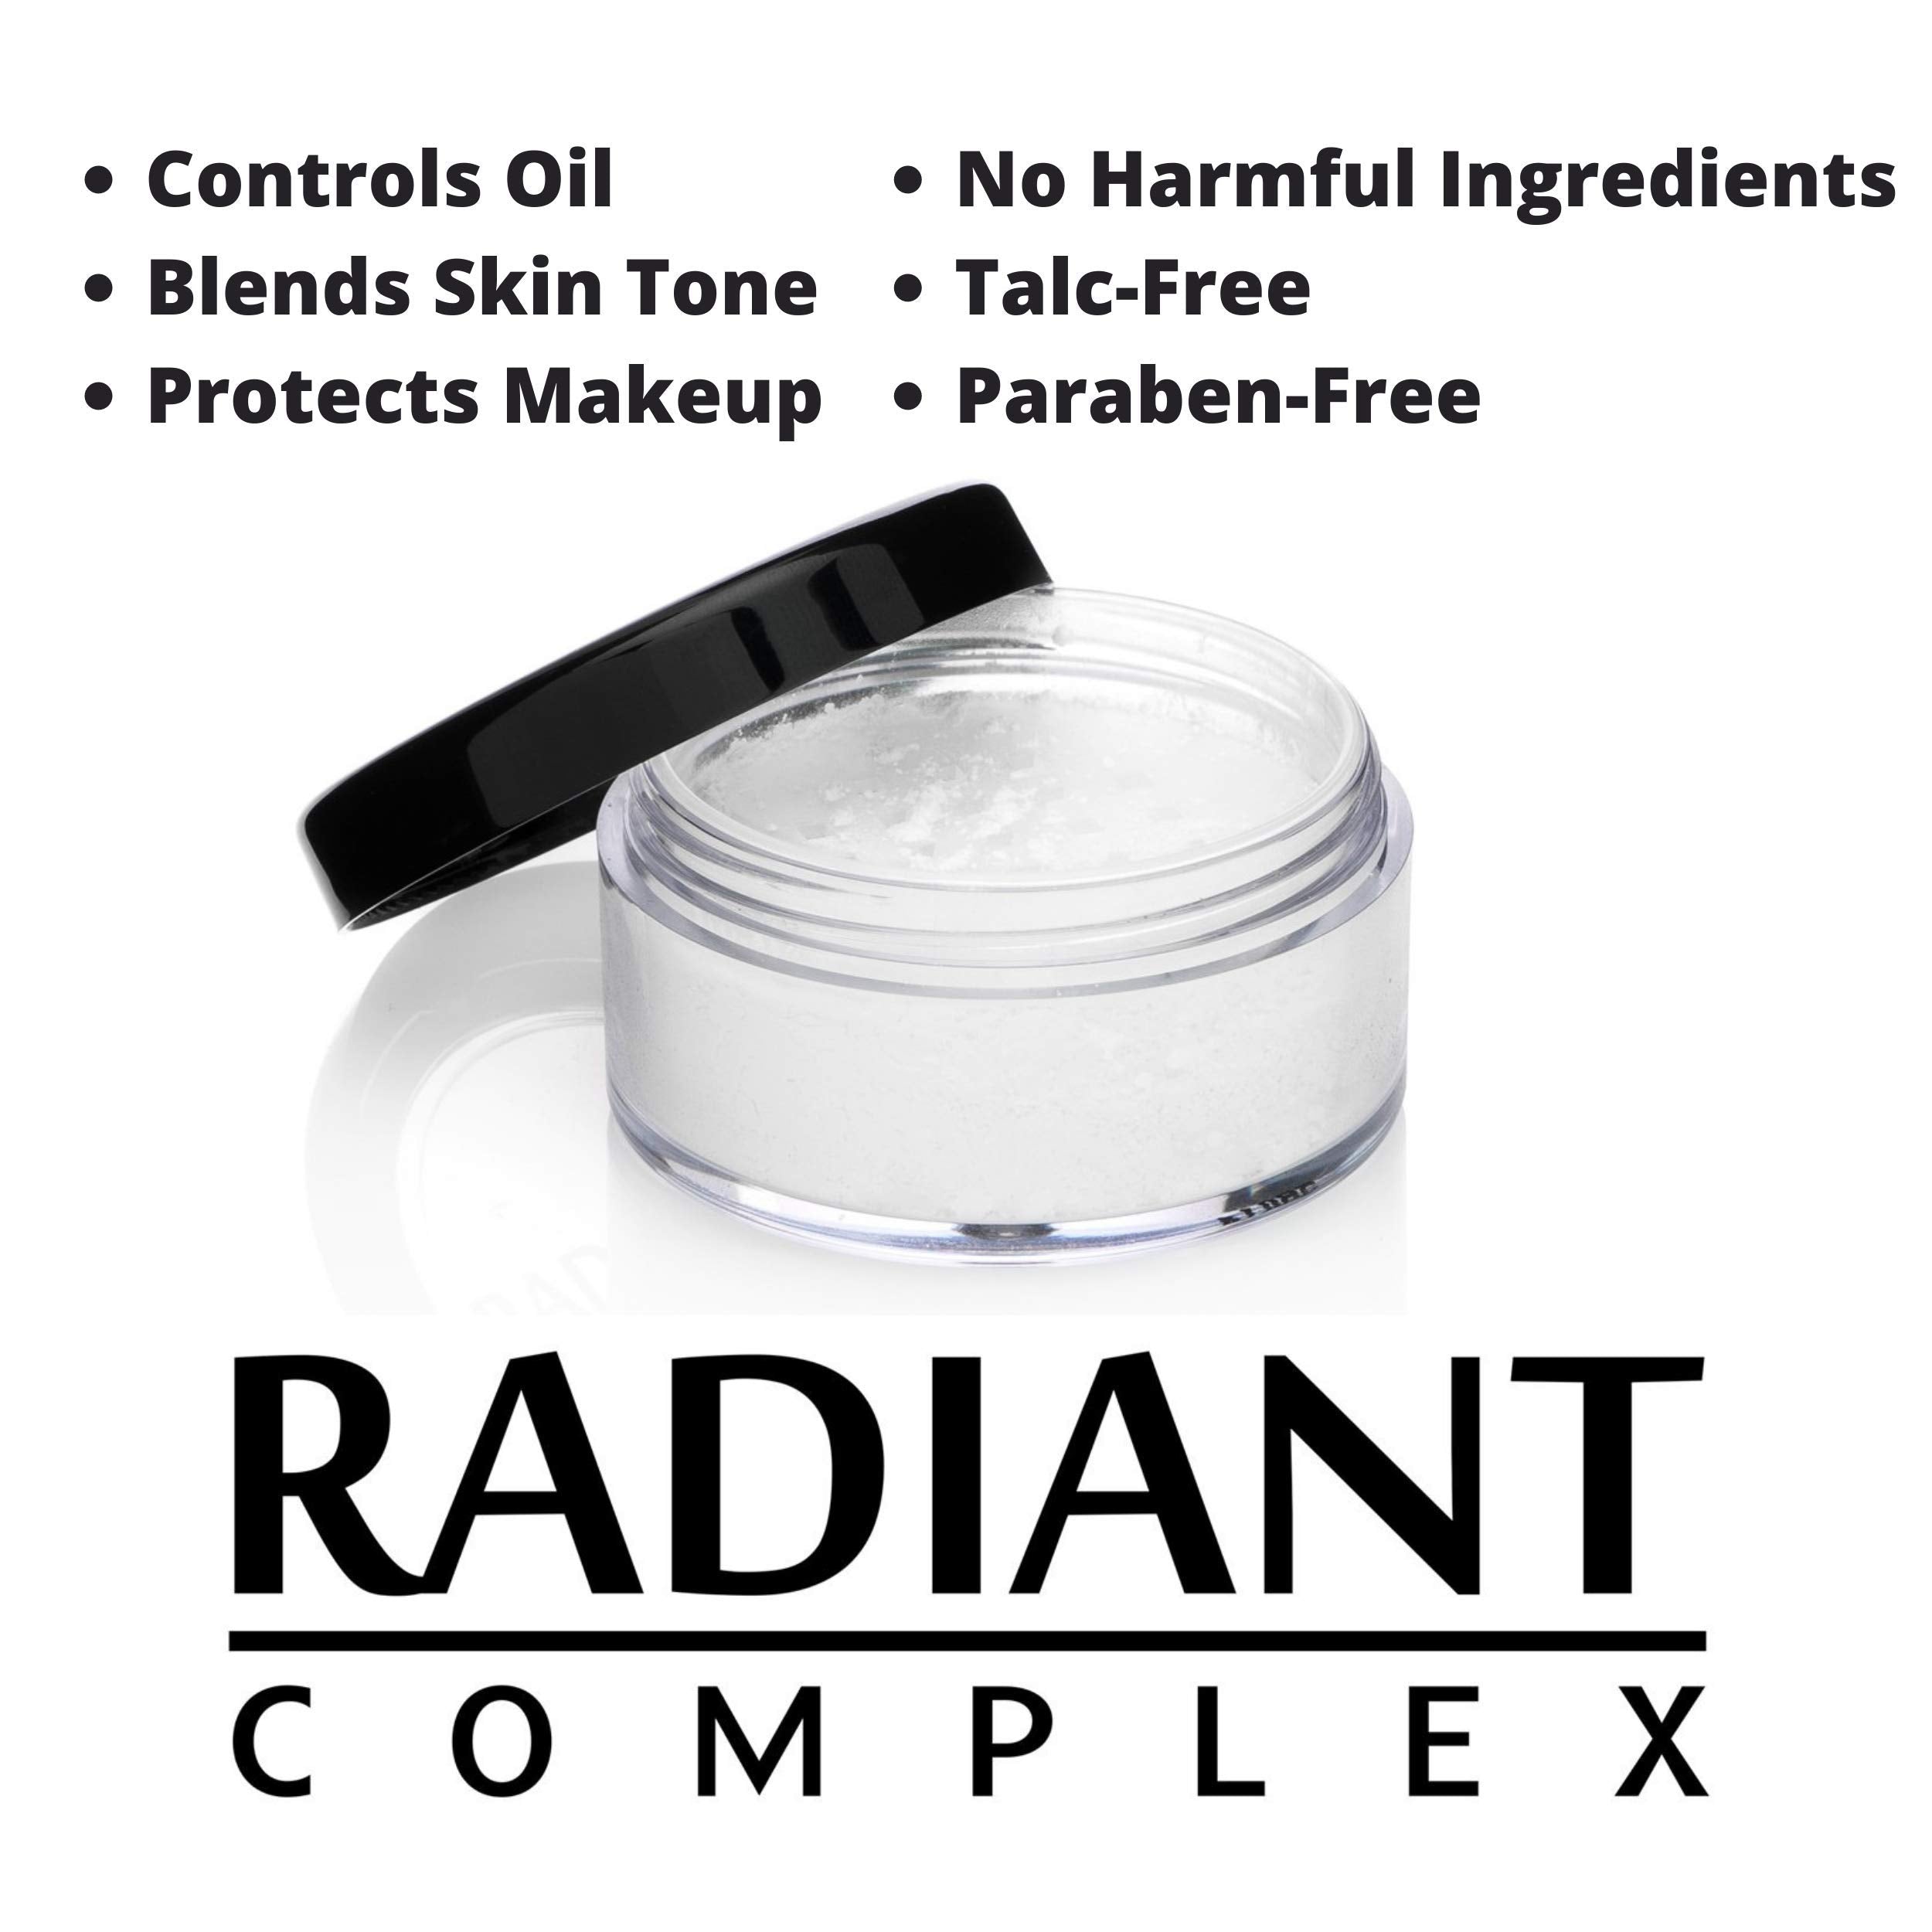 Radiant Complex Translucent Finishing Powder Applies over Primer and Makeup to Protect Your Palette, Control Oil and Preserve Your Contour or Preferred Professional Styling